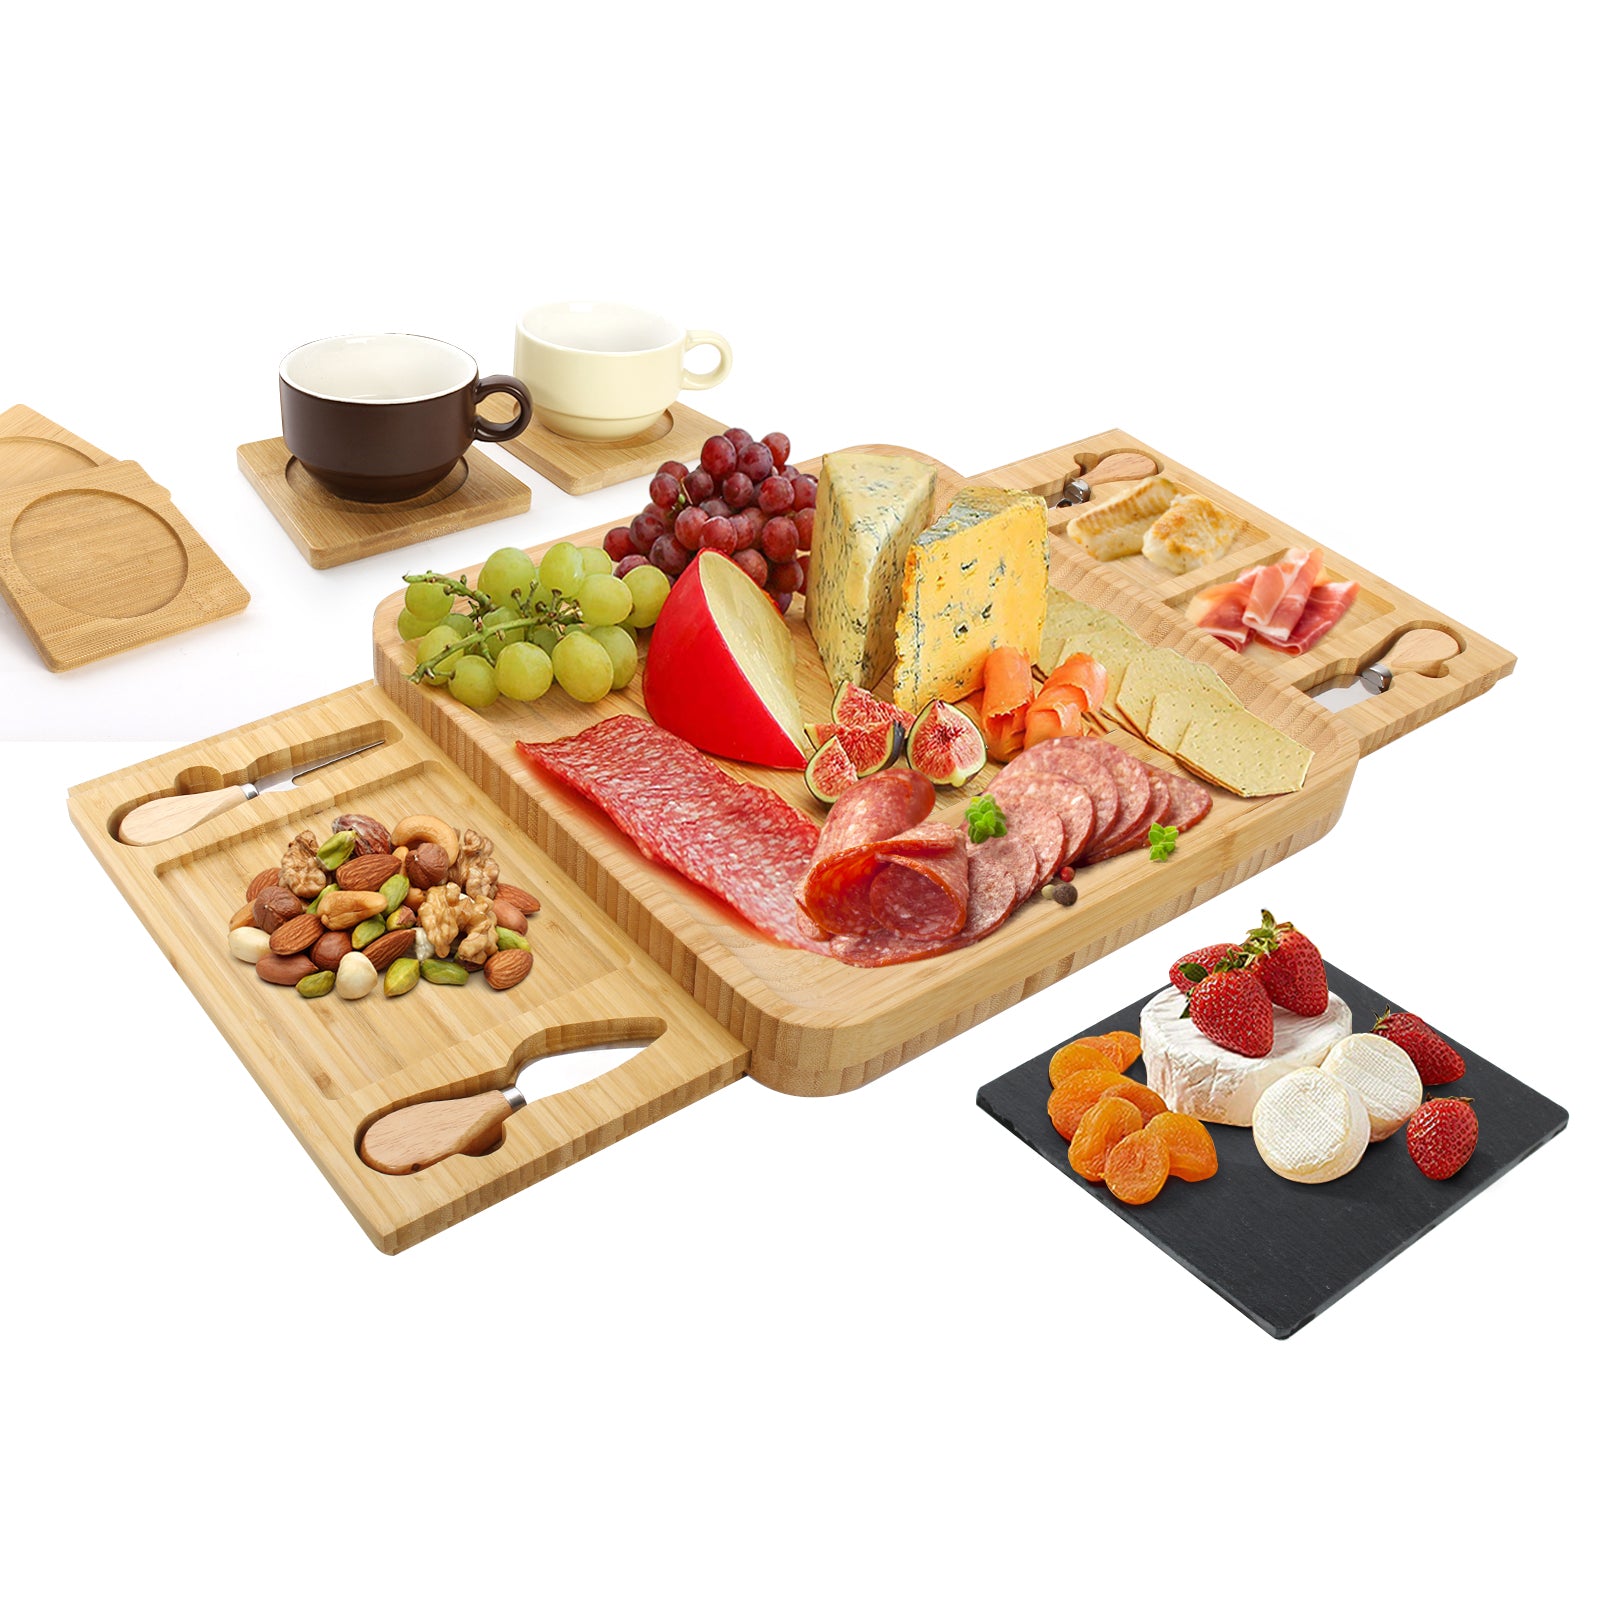 Todeco-Bamboo-Cheese-Board-Set-Cheese-Board-with-Knife-and-Fork-Set-and-Sliding-Drawer-1-Slate-and-4-Coasters-Charcuterie-Board-for-Cheese-Meat-Bamboo-Cheese-Board-Set